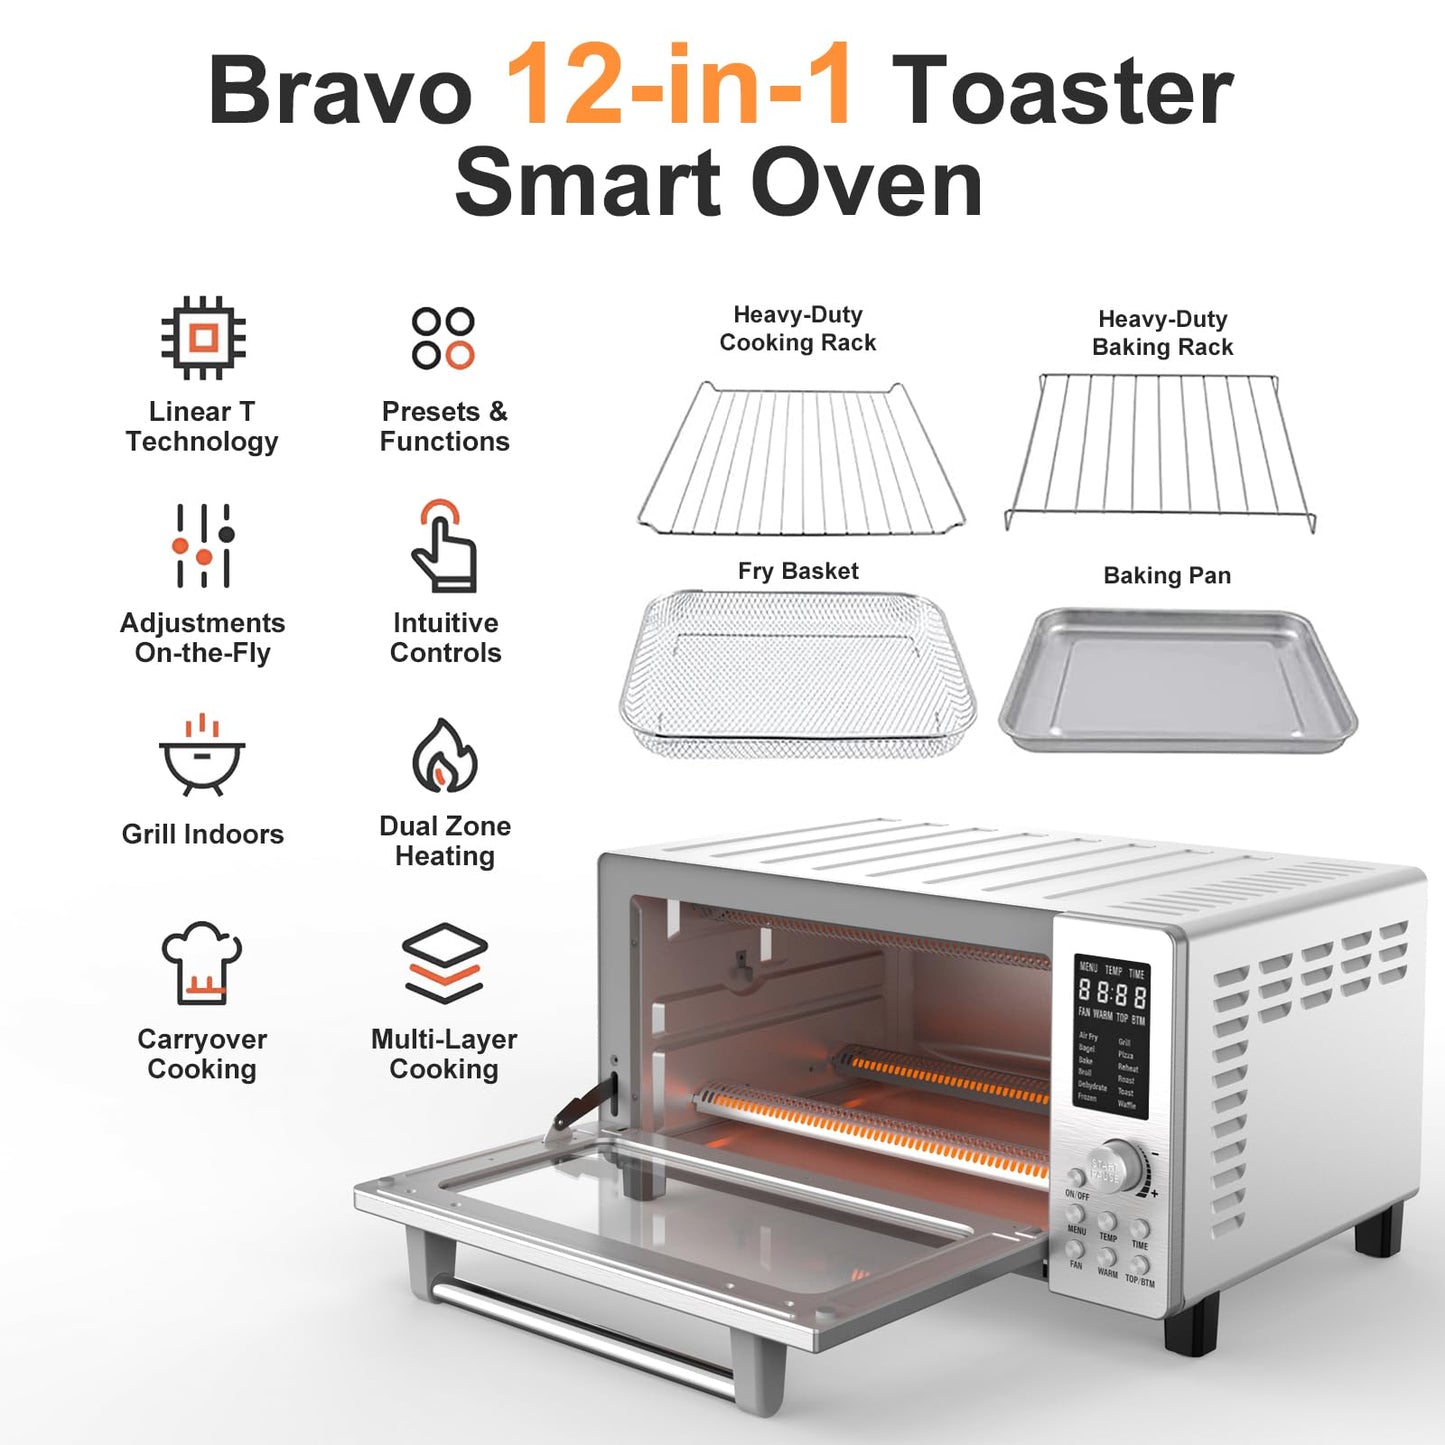 Nuwave Bravo Air Fryer Toaster Smart Oven, 12-in-1 Countertop Convection, 1800 Watts, 21-Qt Capacity, 50°-450°F Temp Controls, Top and Bottom Heater Adjustments 0%-100%, Brushed Stainless Steel Look